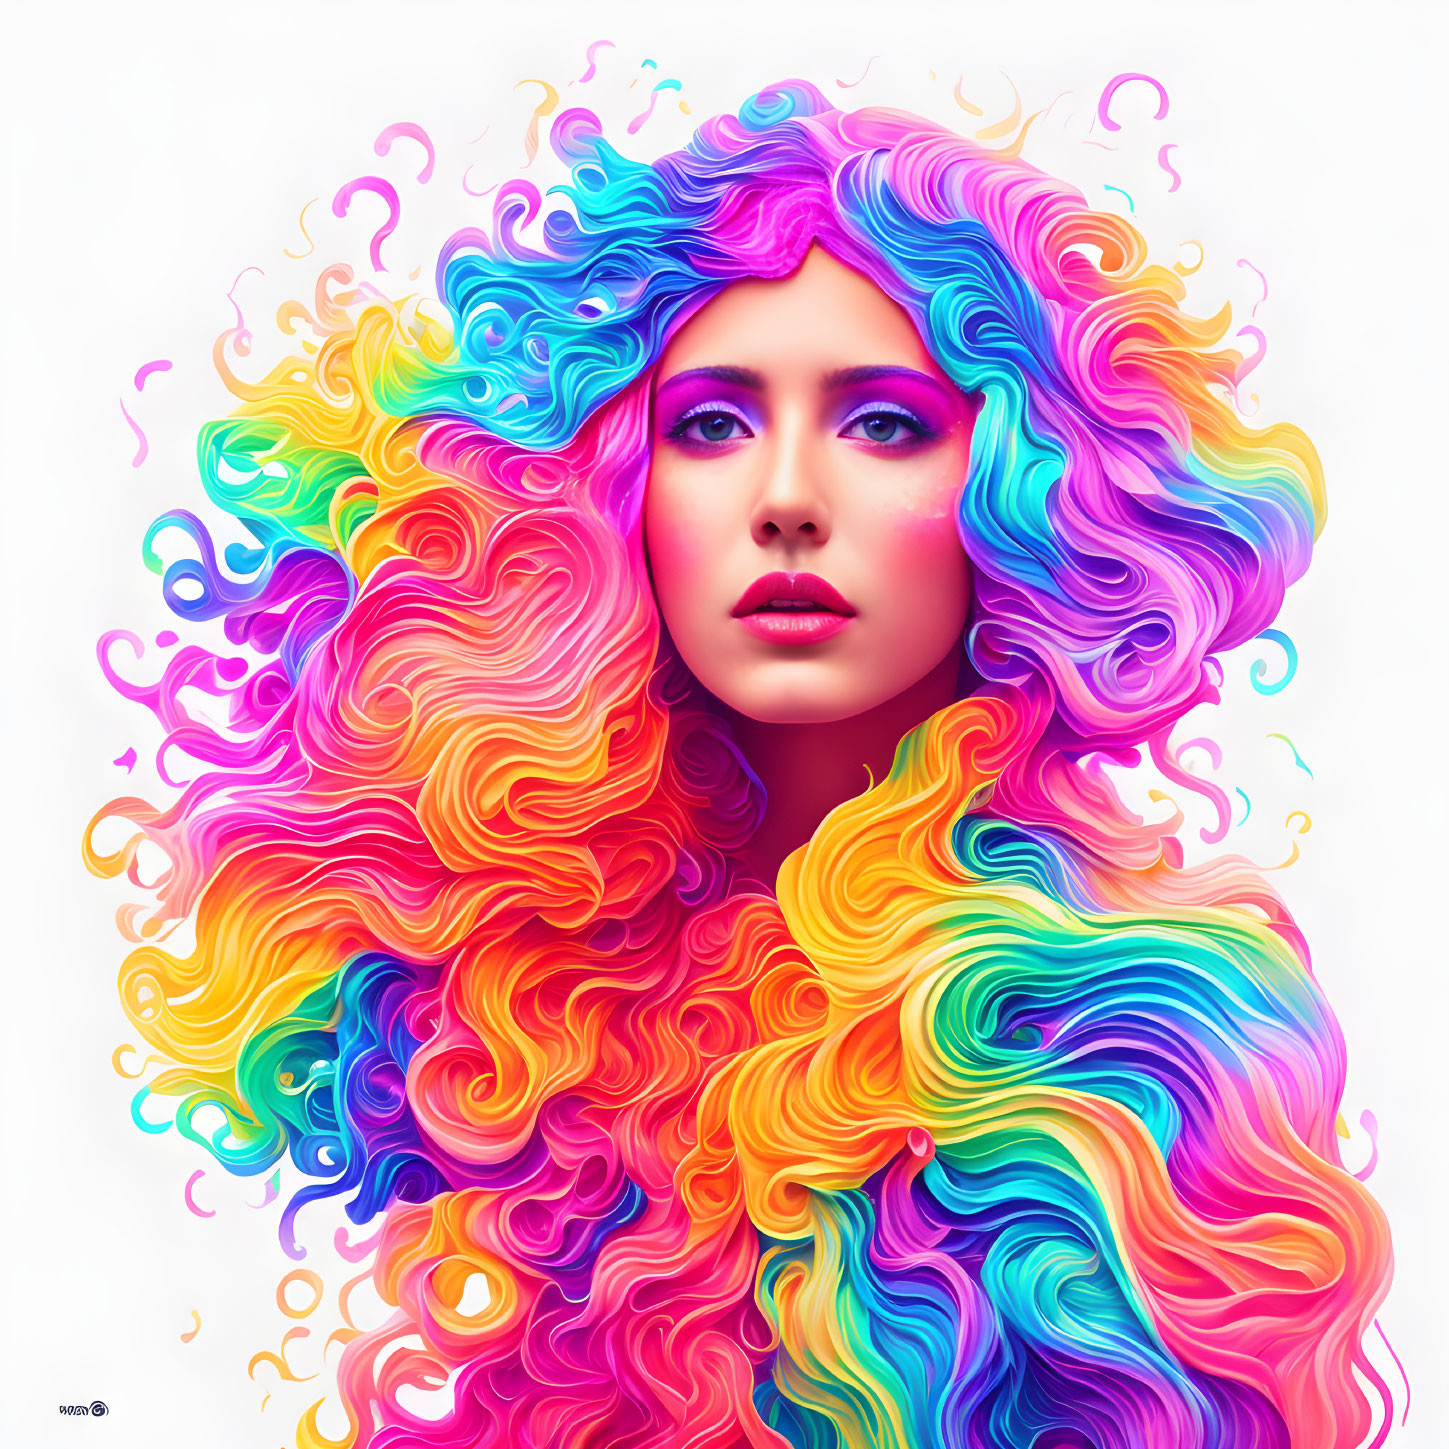 Colorful digital portrait: Woman with rainbow hair and curls